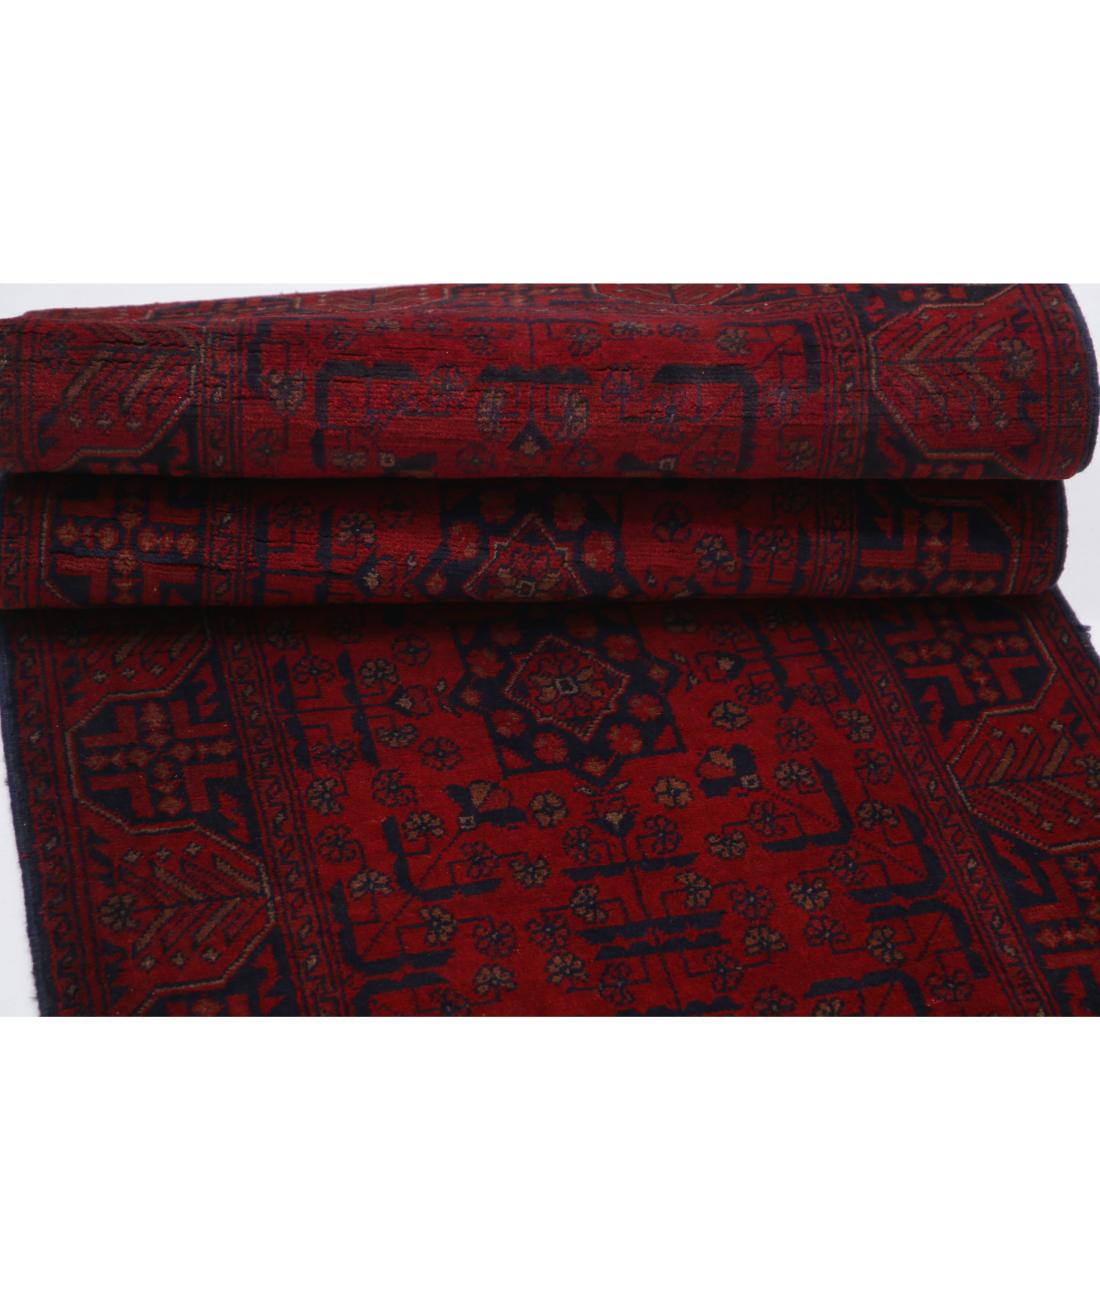 Hand Knotted Afghan Khal Muhammadi Wool Rug - 2'7'' x 9'5'' 2' 7" X 9' 5" (79 X 287) / Red / Blue